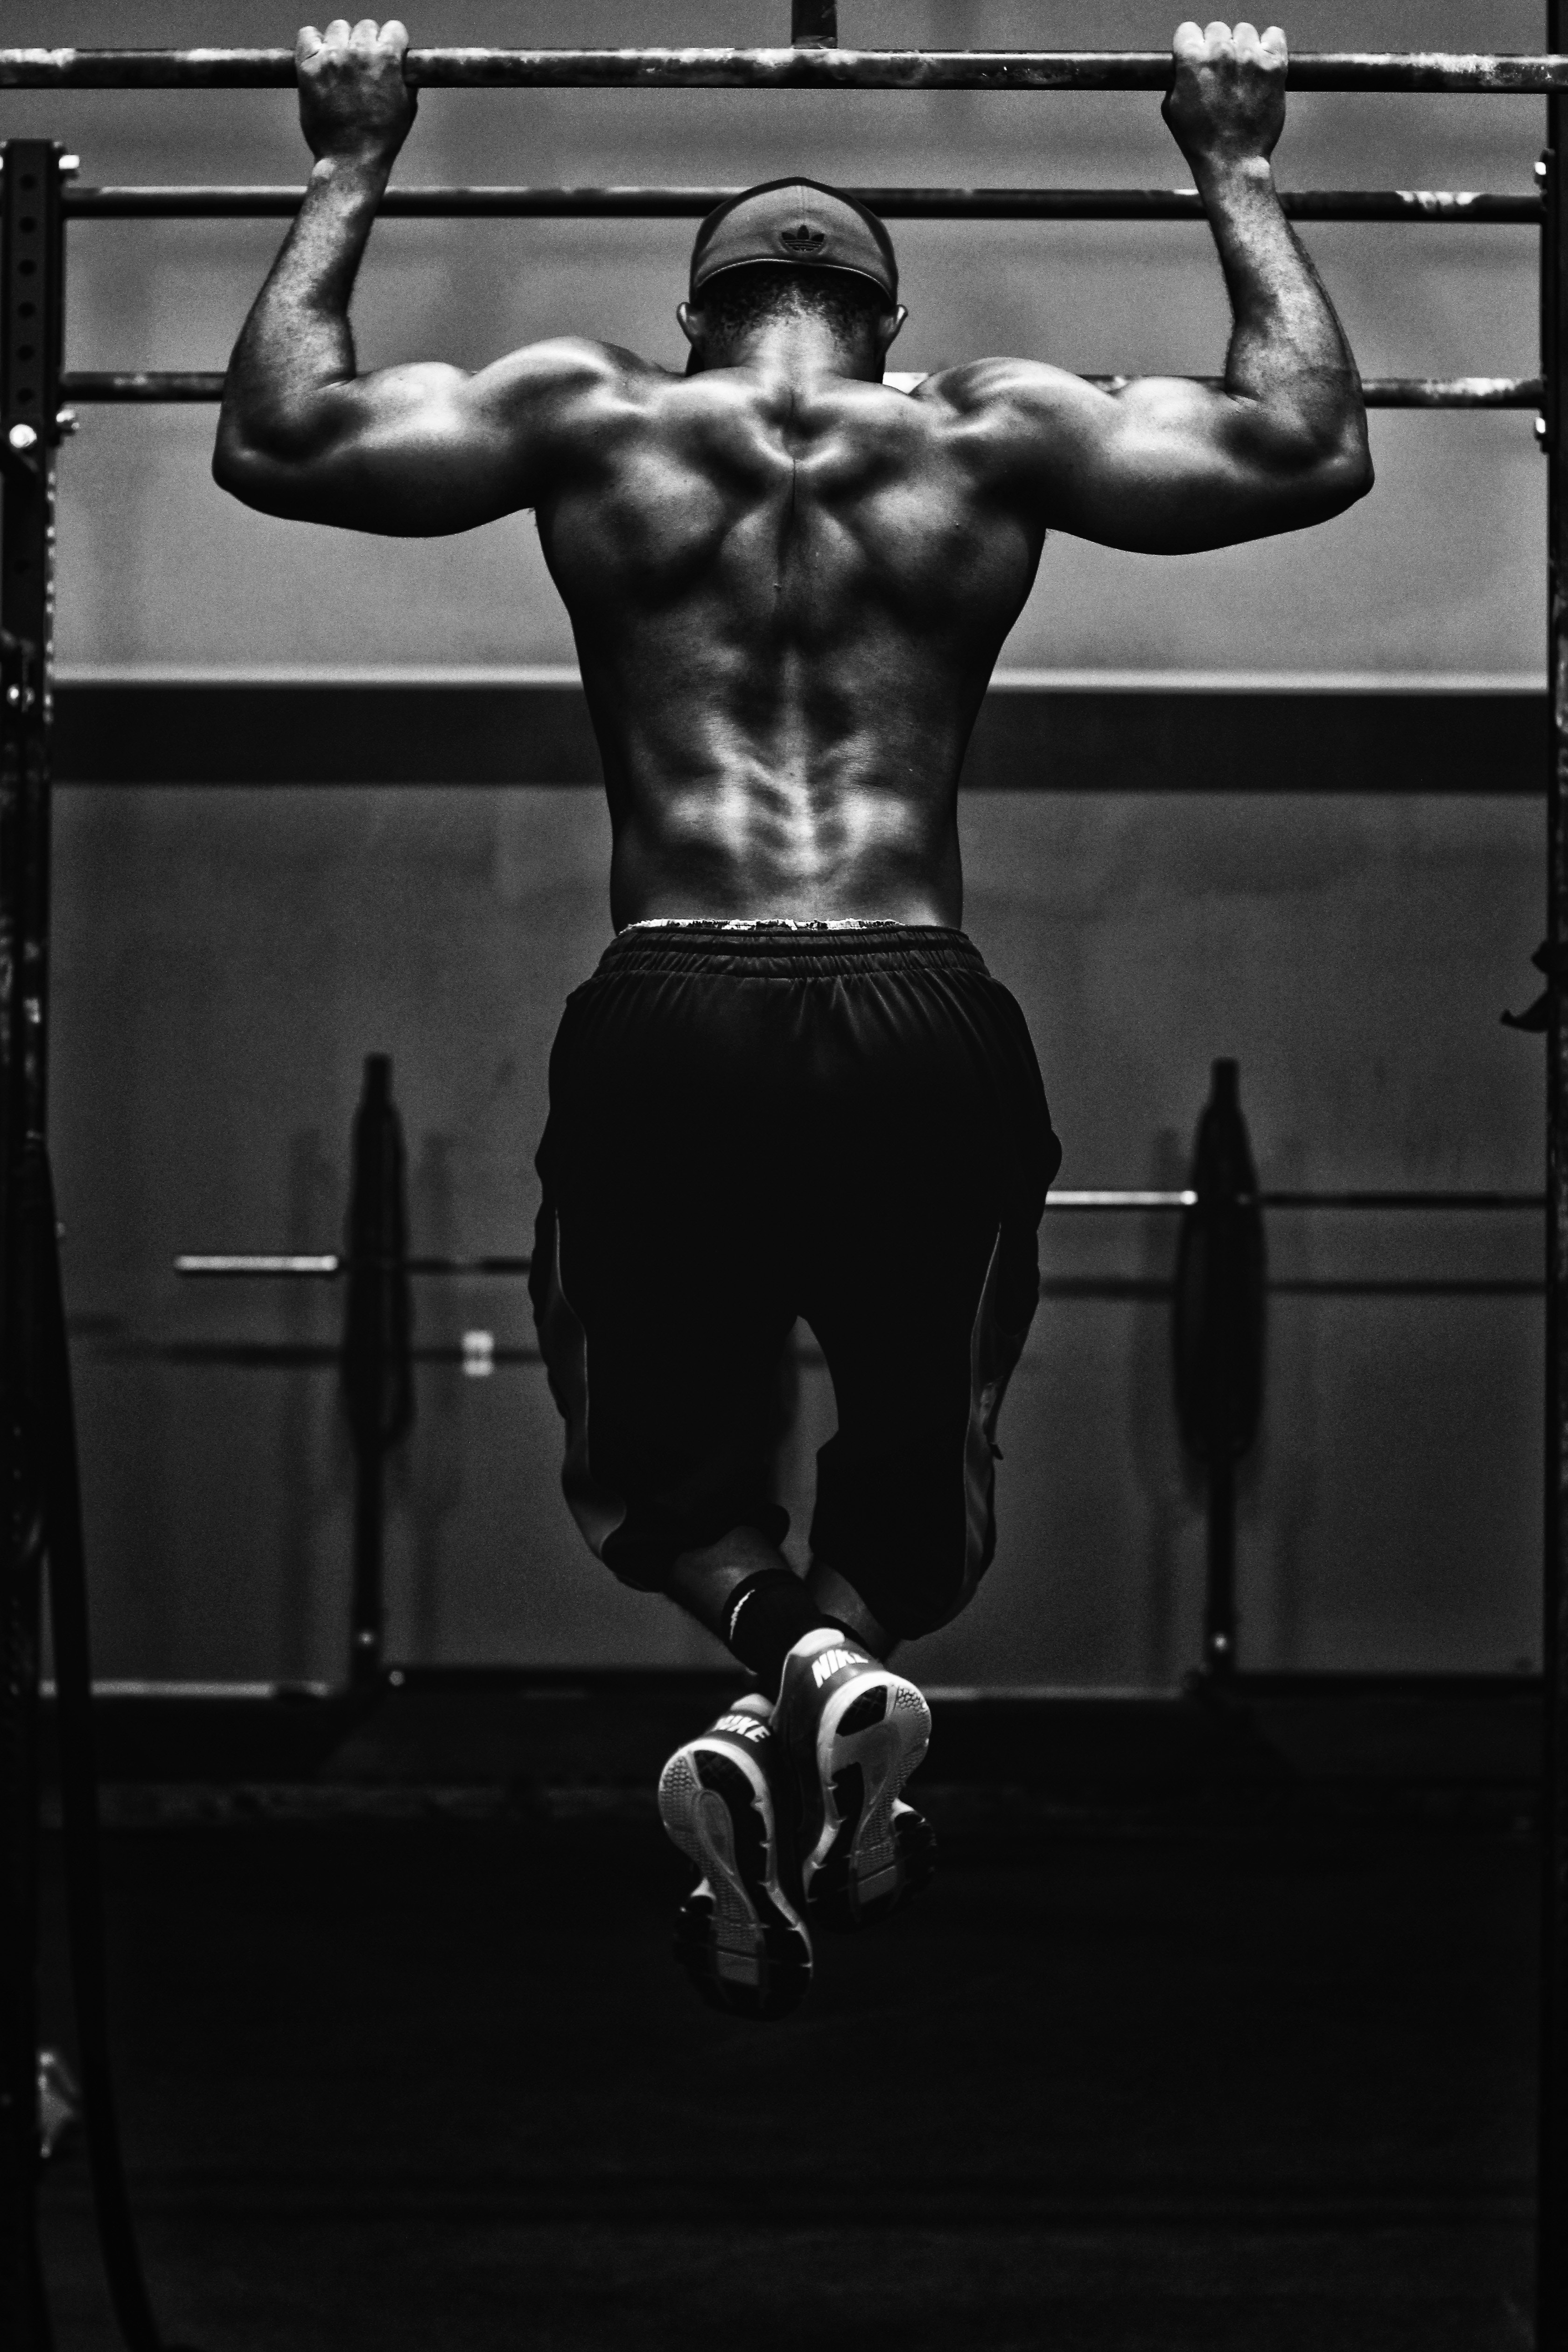 102965 download wallpaper sports, bw, chb, man, beam, muscle, athlete, sportsman, brawn, workout, pull-ups, crossbar, horizontal bar screensavers and pictures for free